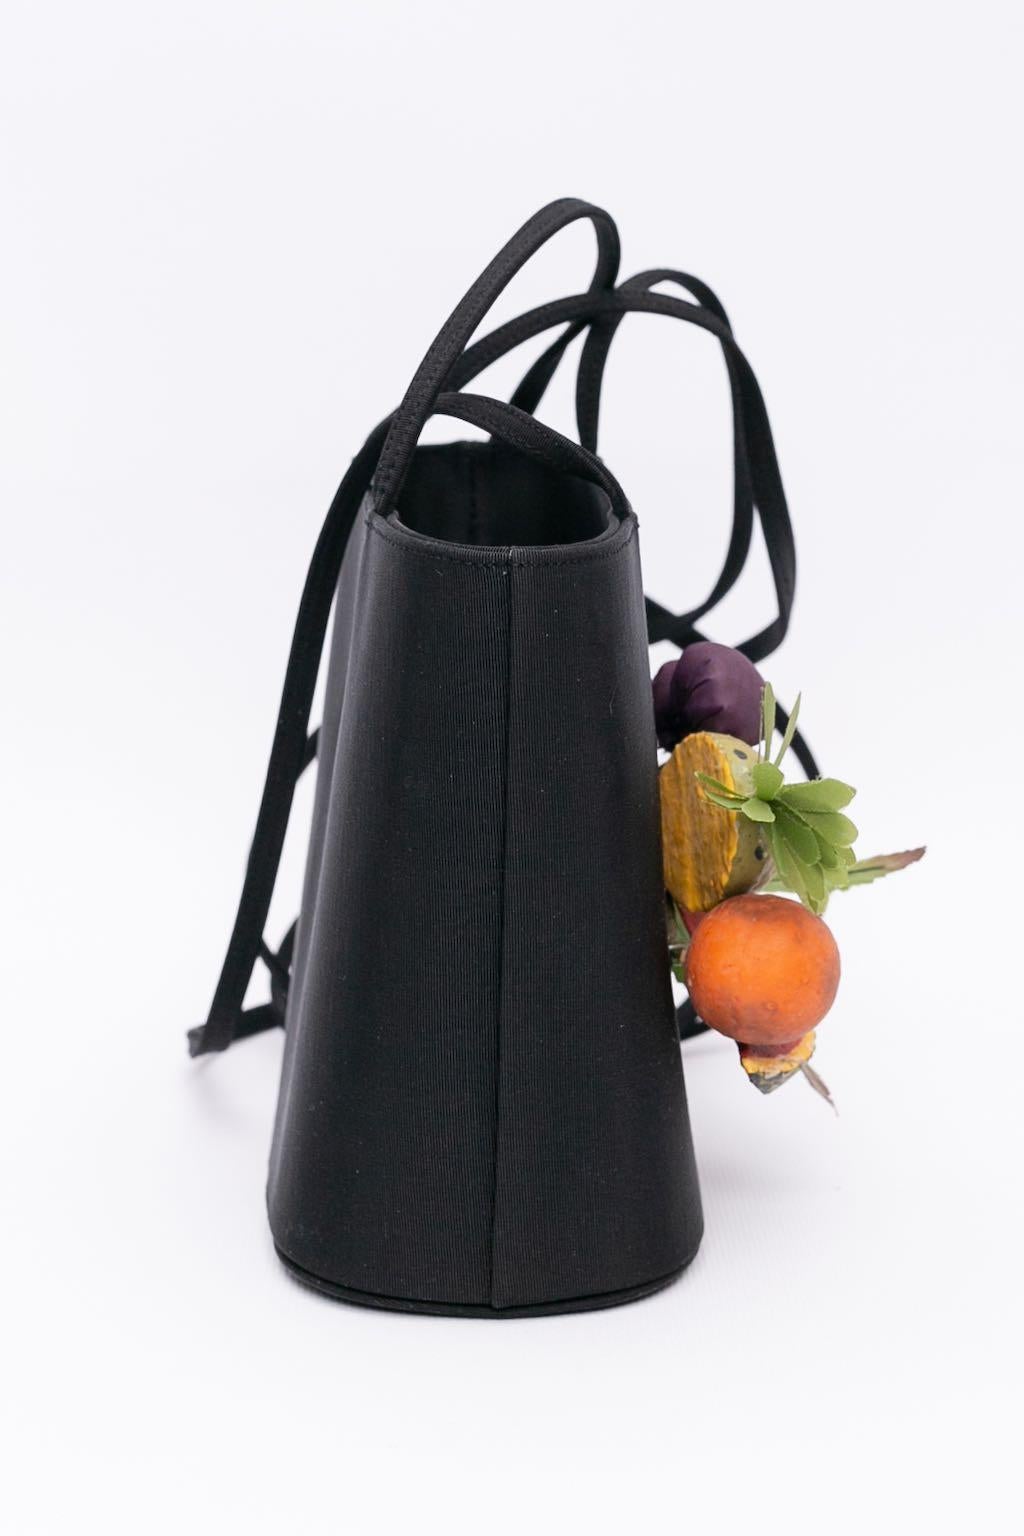 Andrea Pfister Fruits Bag in Black Fabric For Sale 1